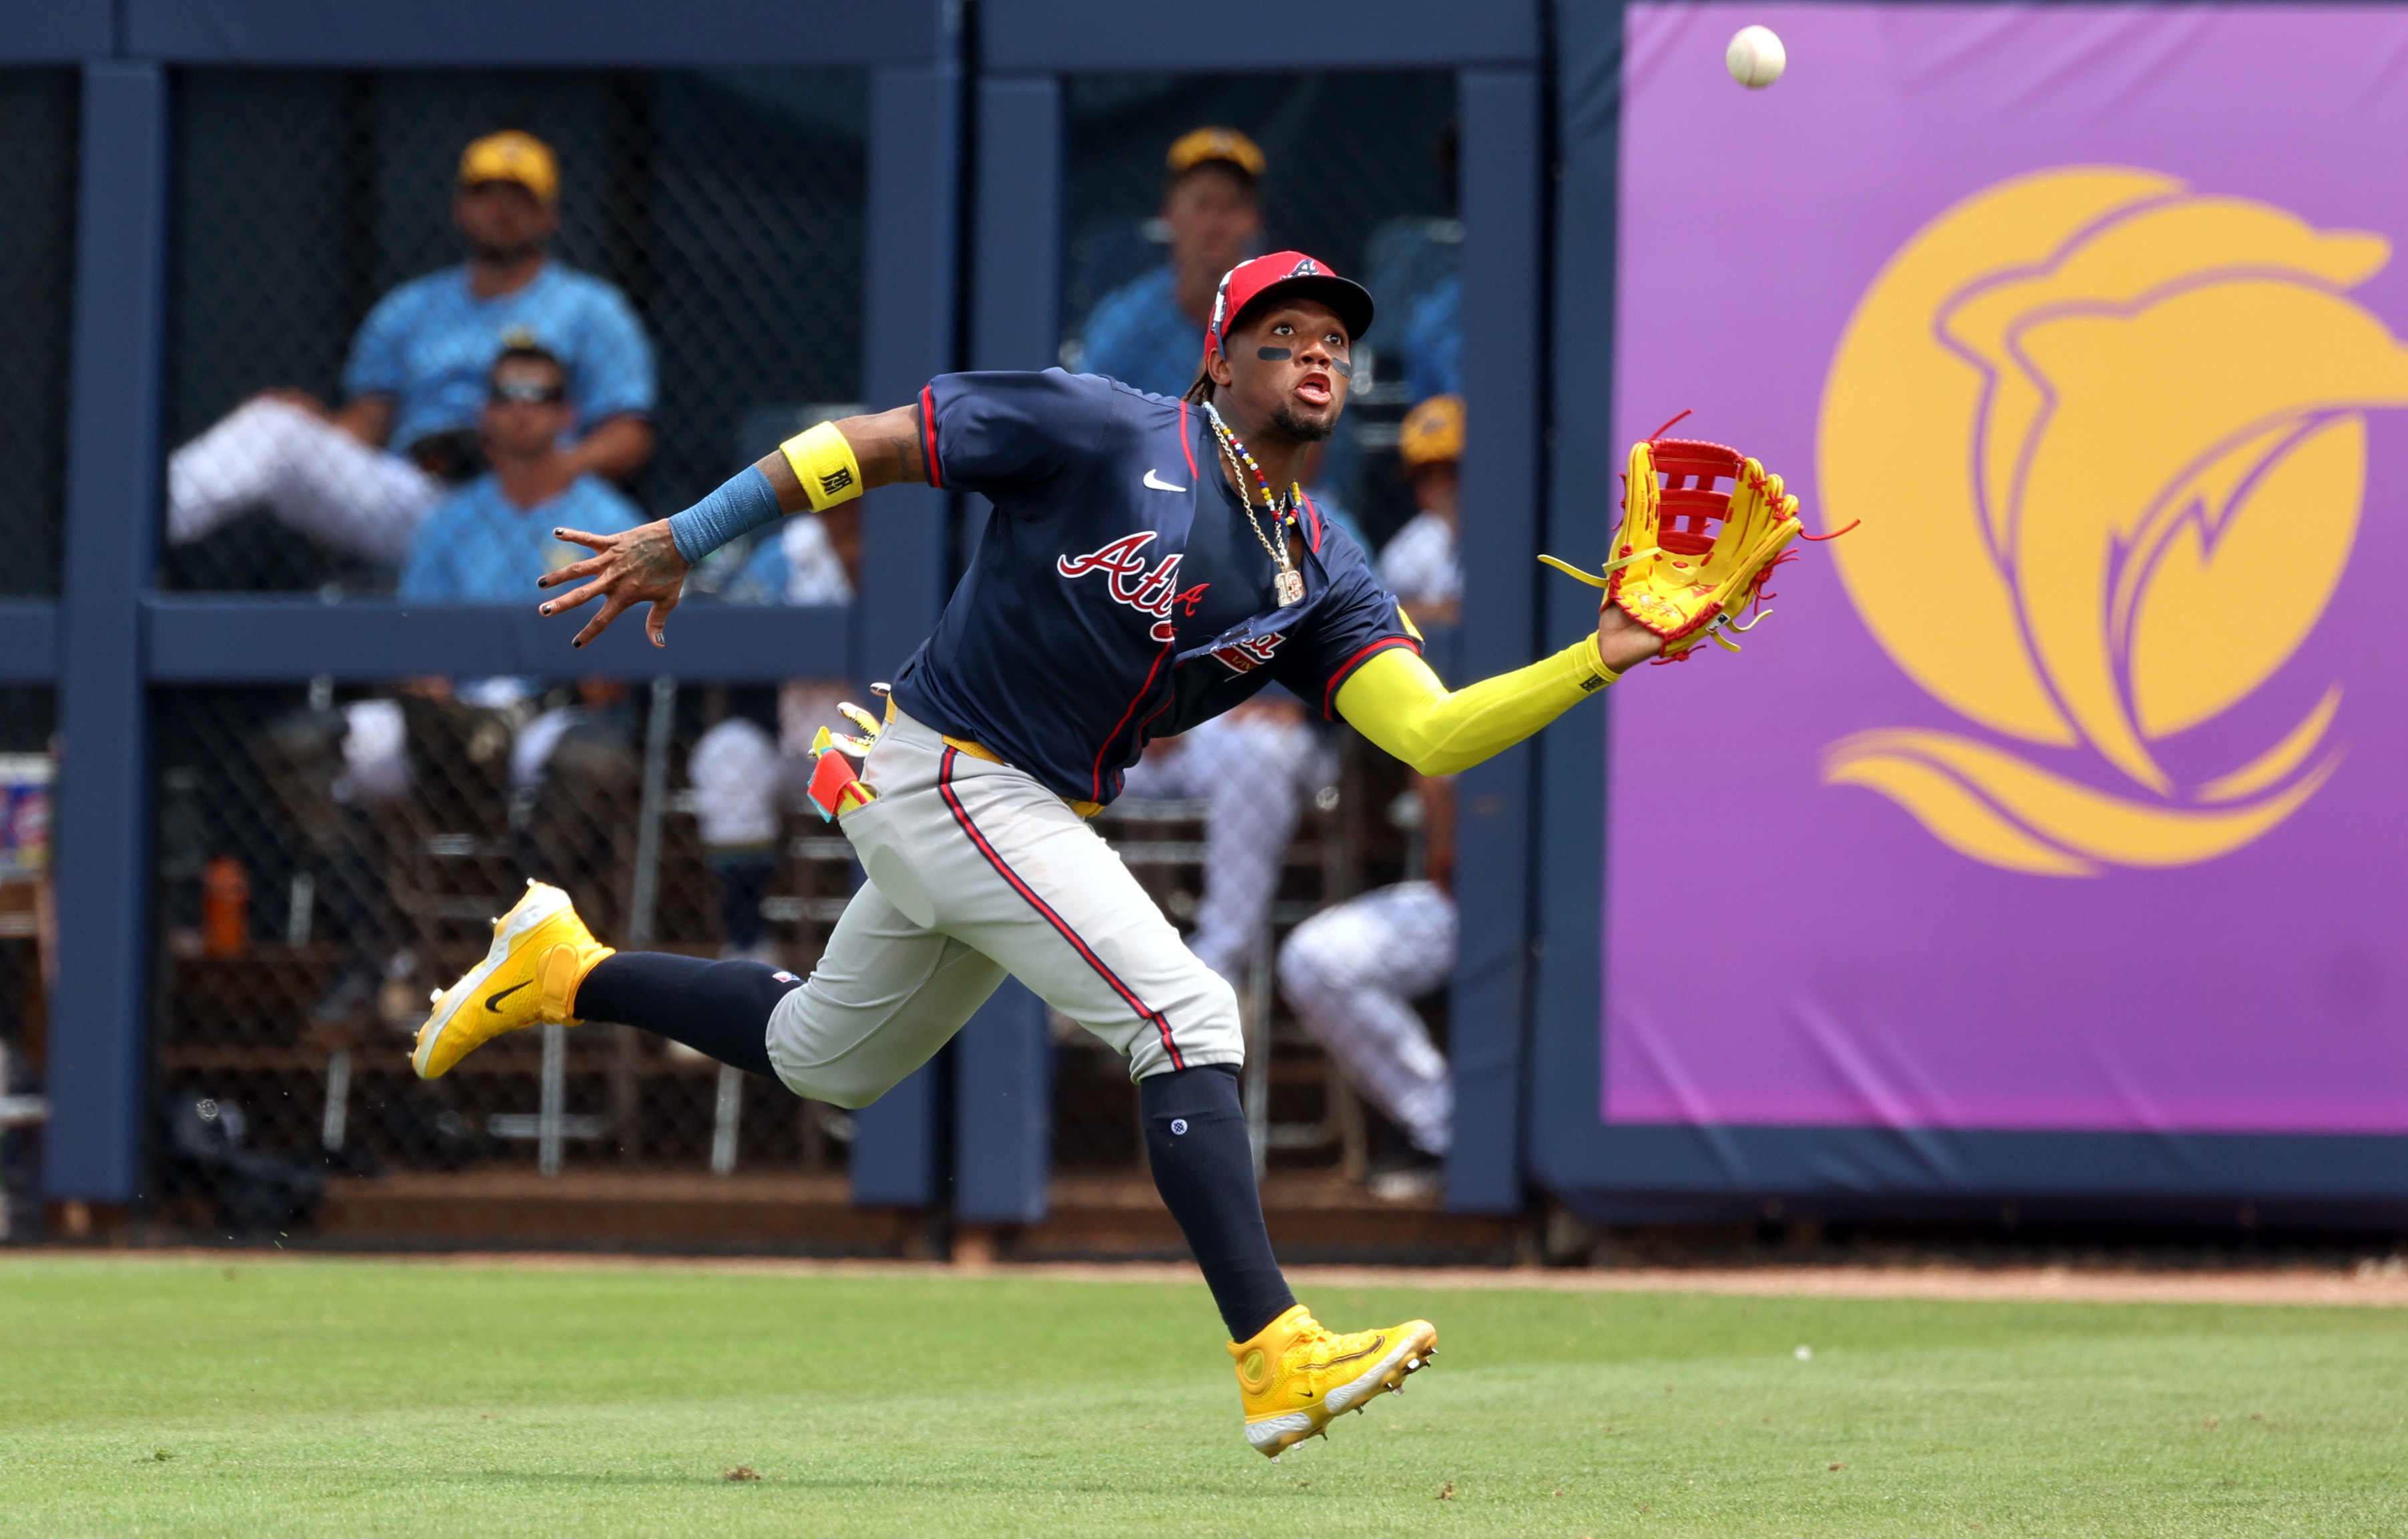 Braves top 30 prospects assignment projections - Battery Power